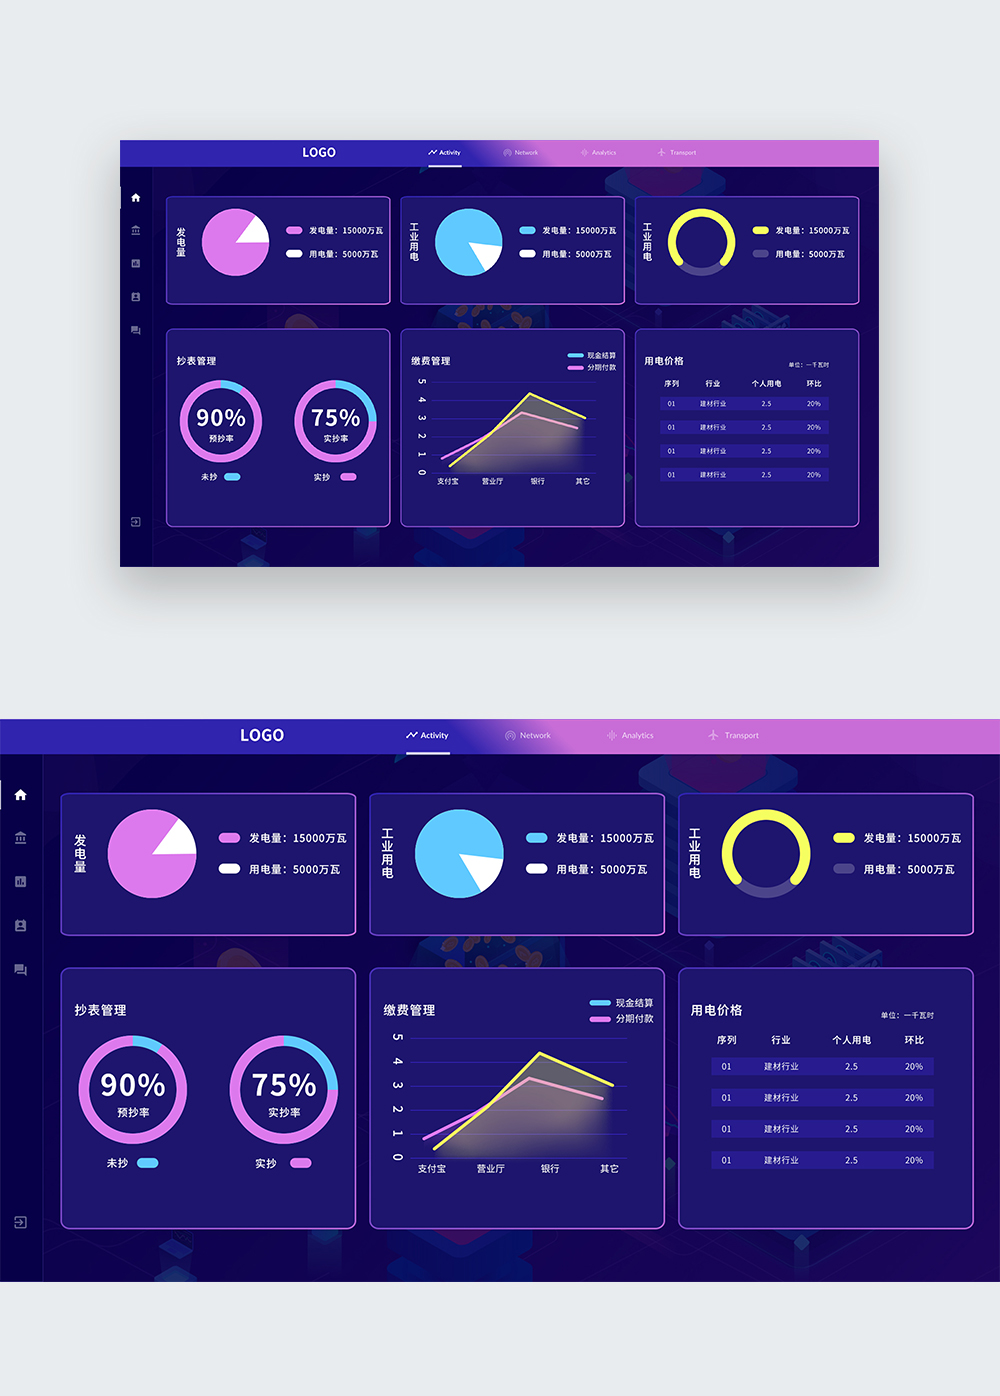 Ui design background management system home web interface template